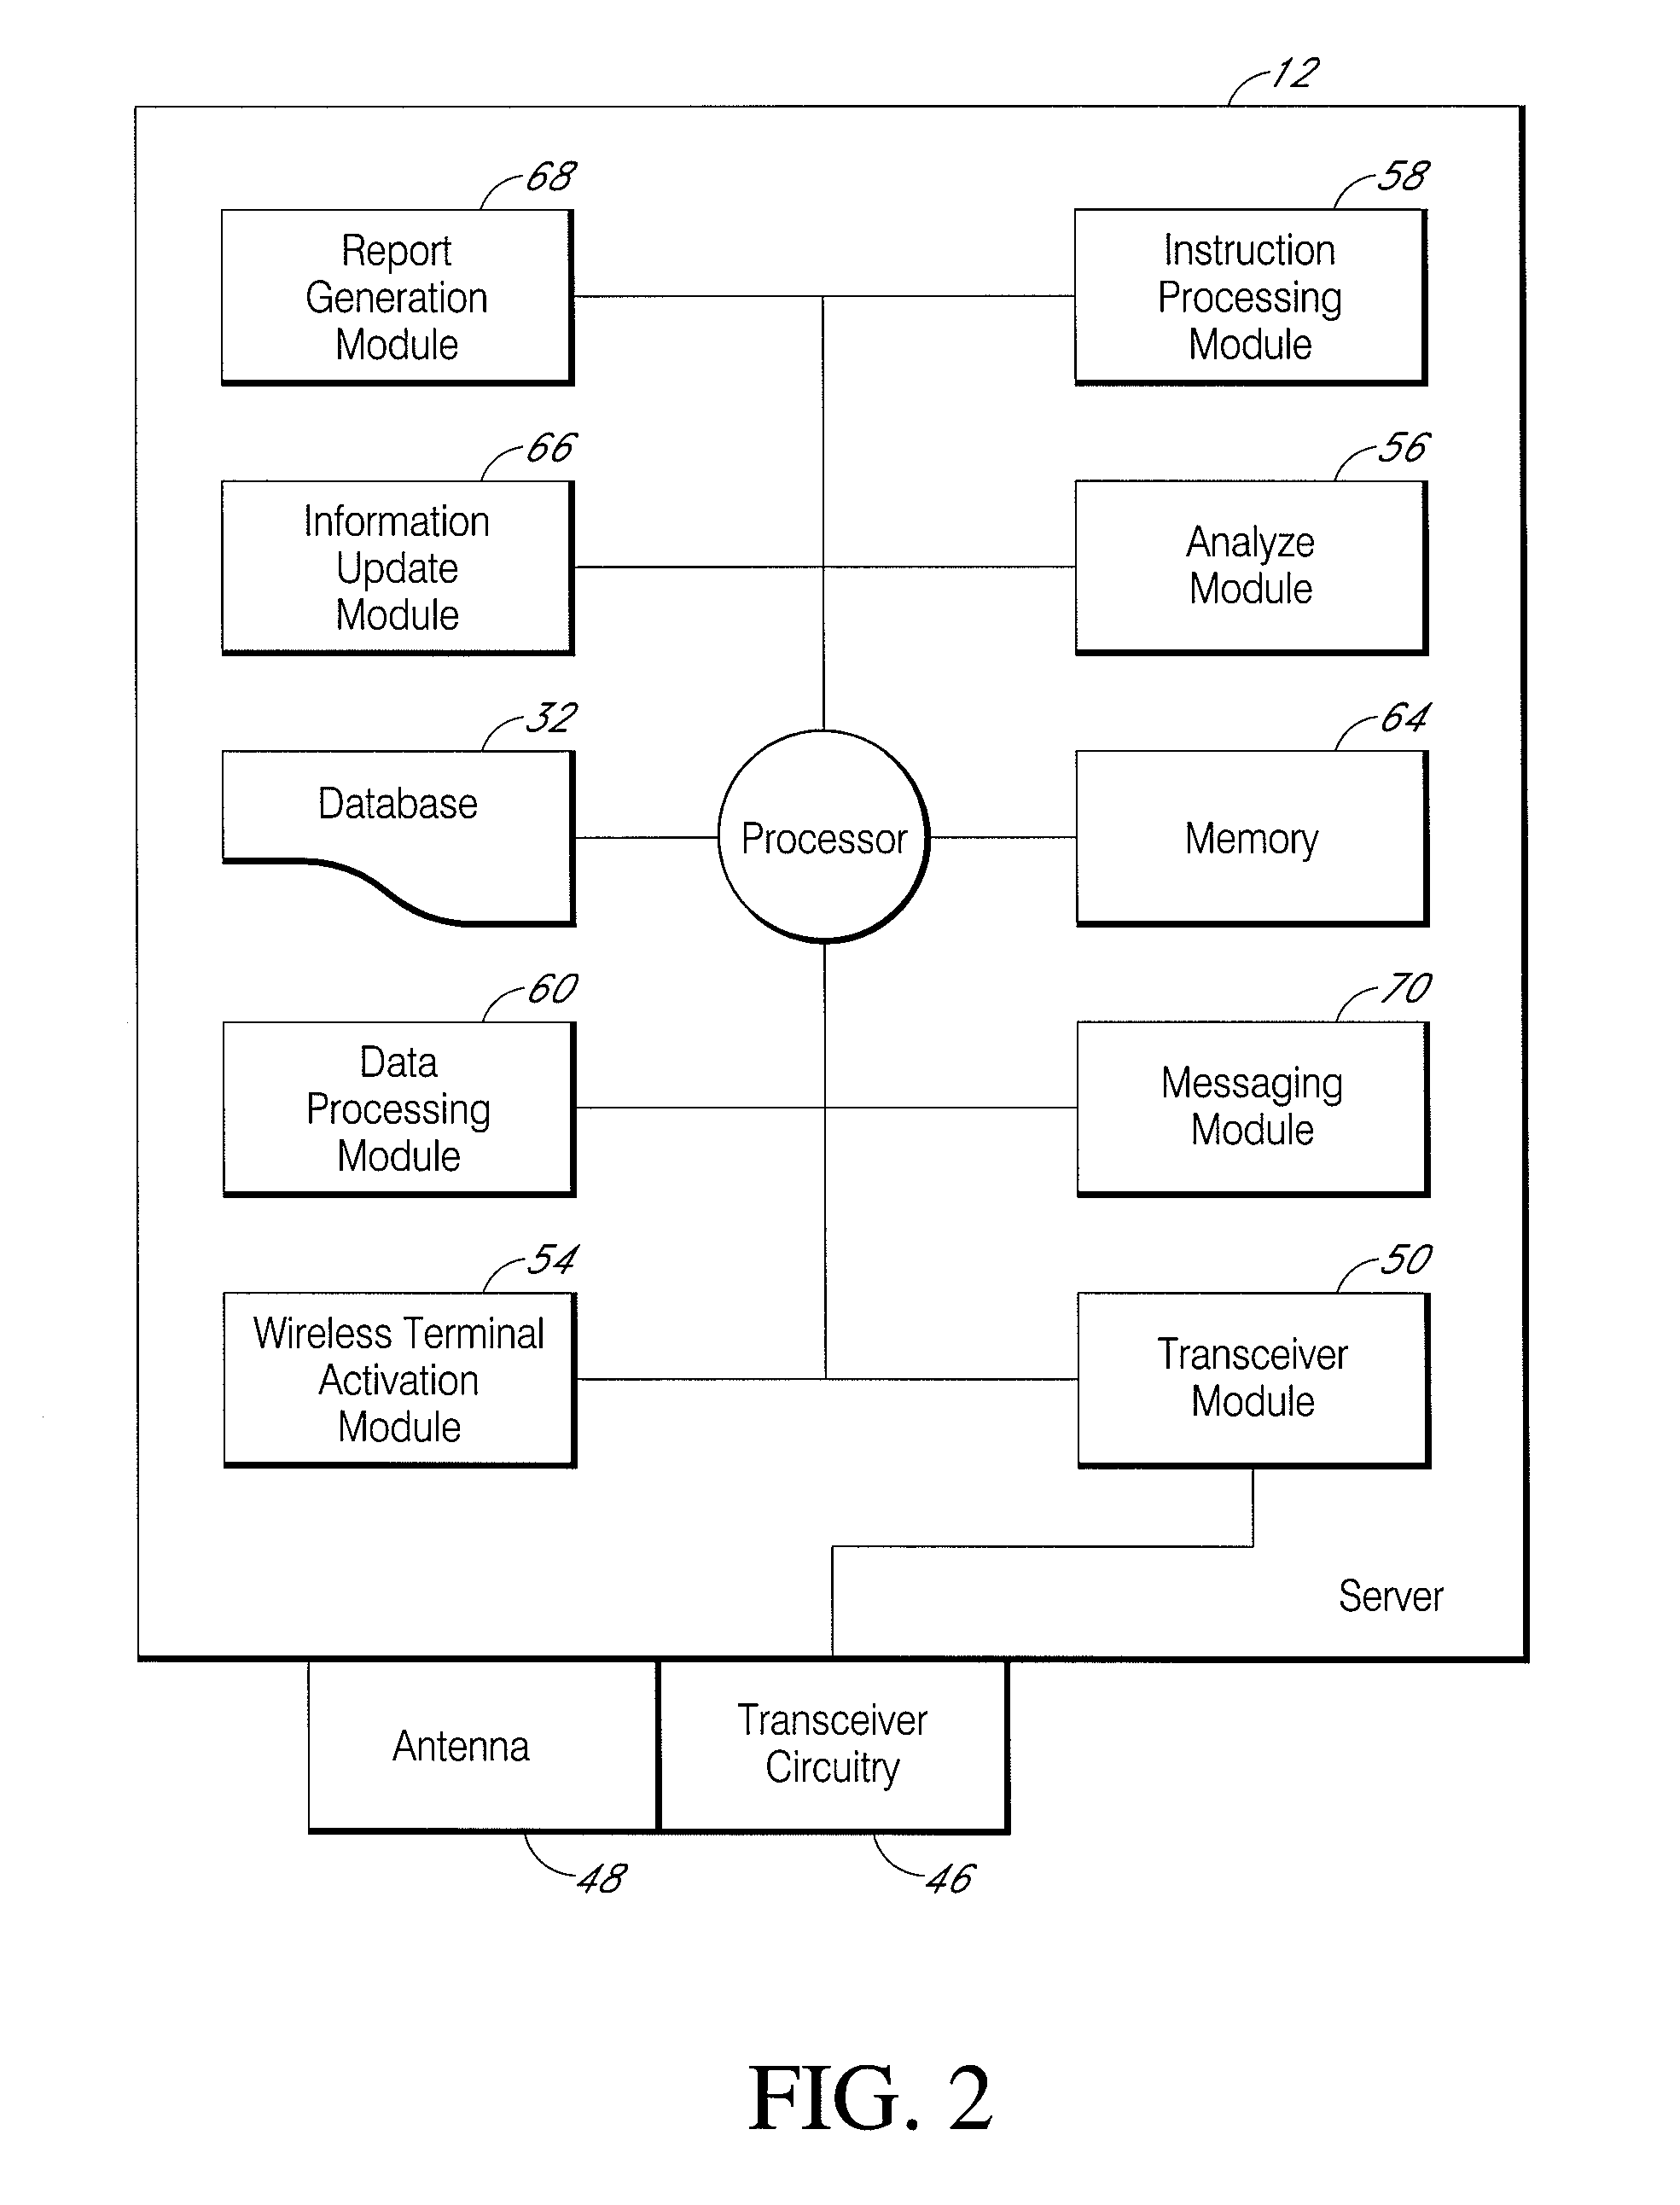 Electronic data capture in a medical workflow system